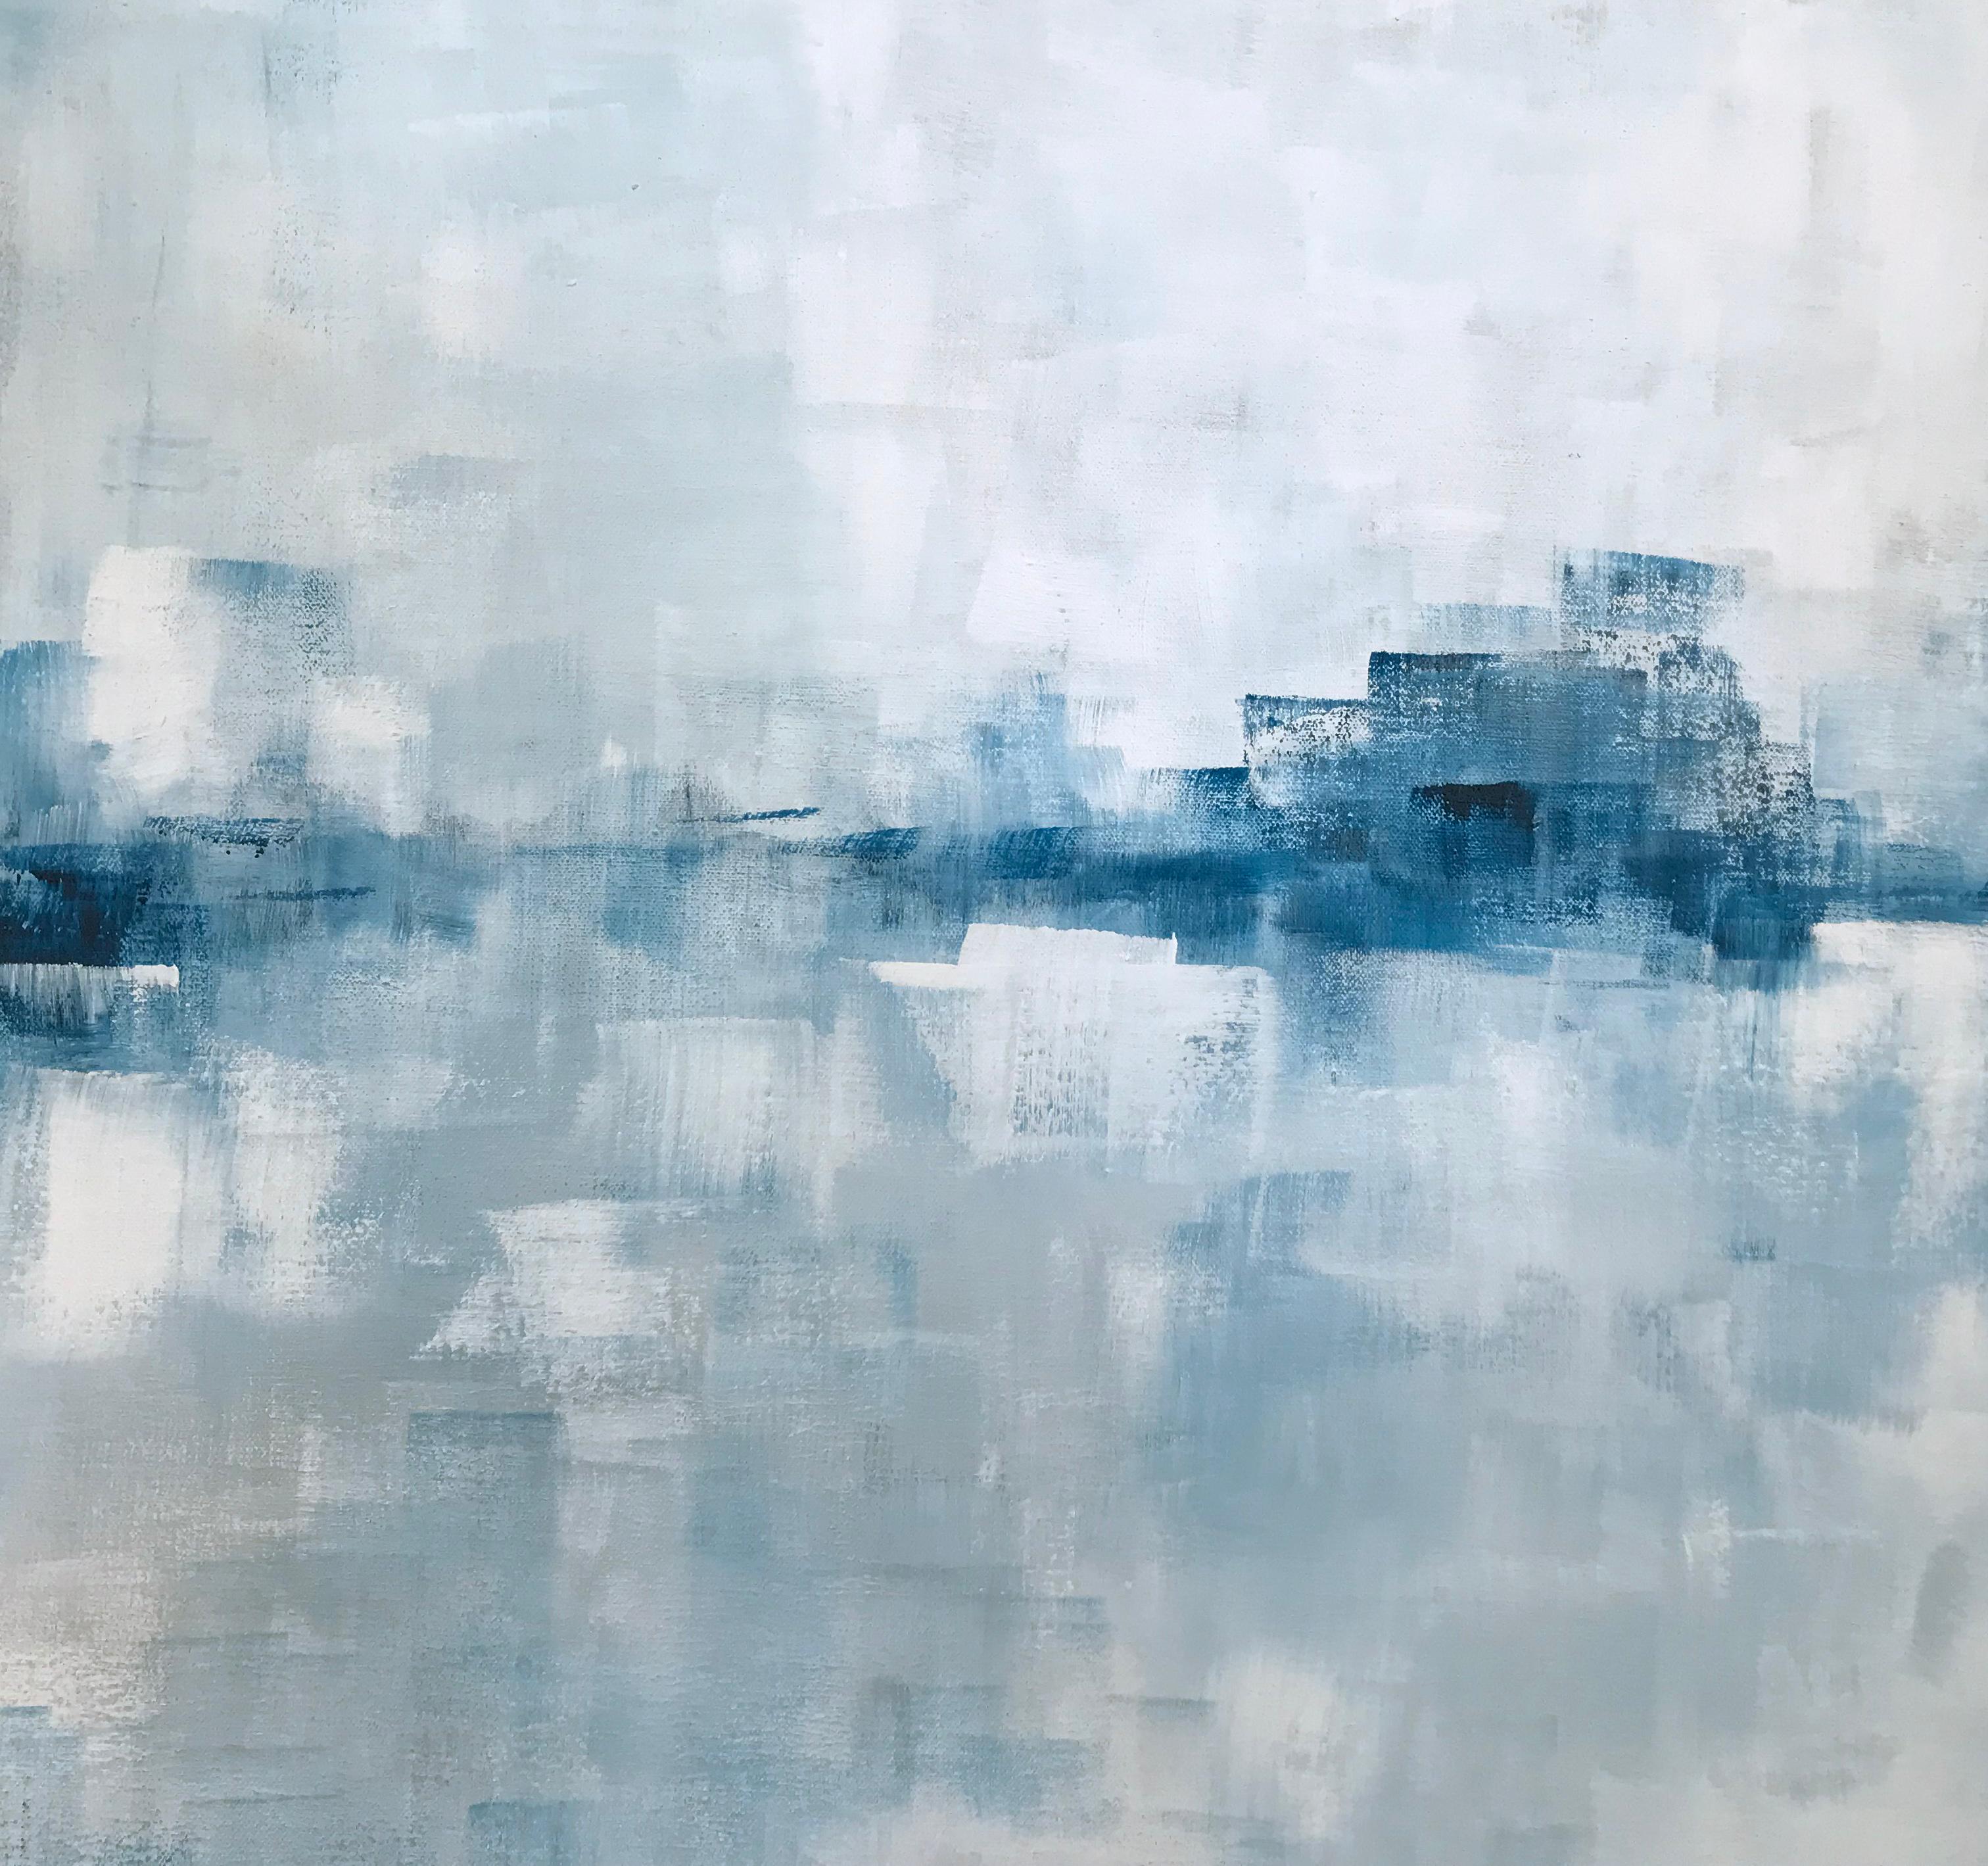 This abstract painting by Dolores Tema features a cool metallic painting. The piece is composed of small strokes of layered blue, white, grey, and silver, with an imperfect line of blue creating a horizon line across the width of the piece. It is